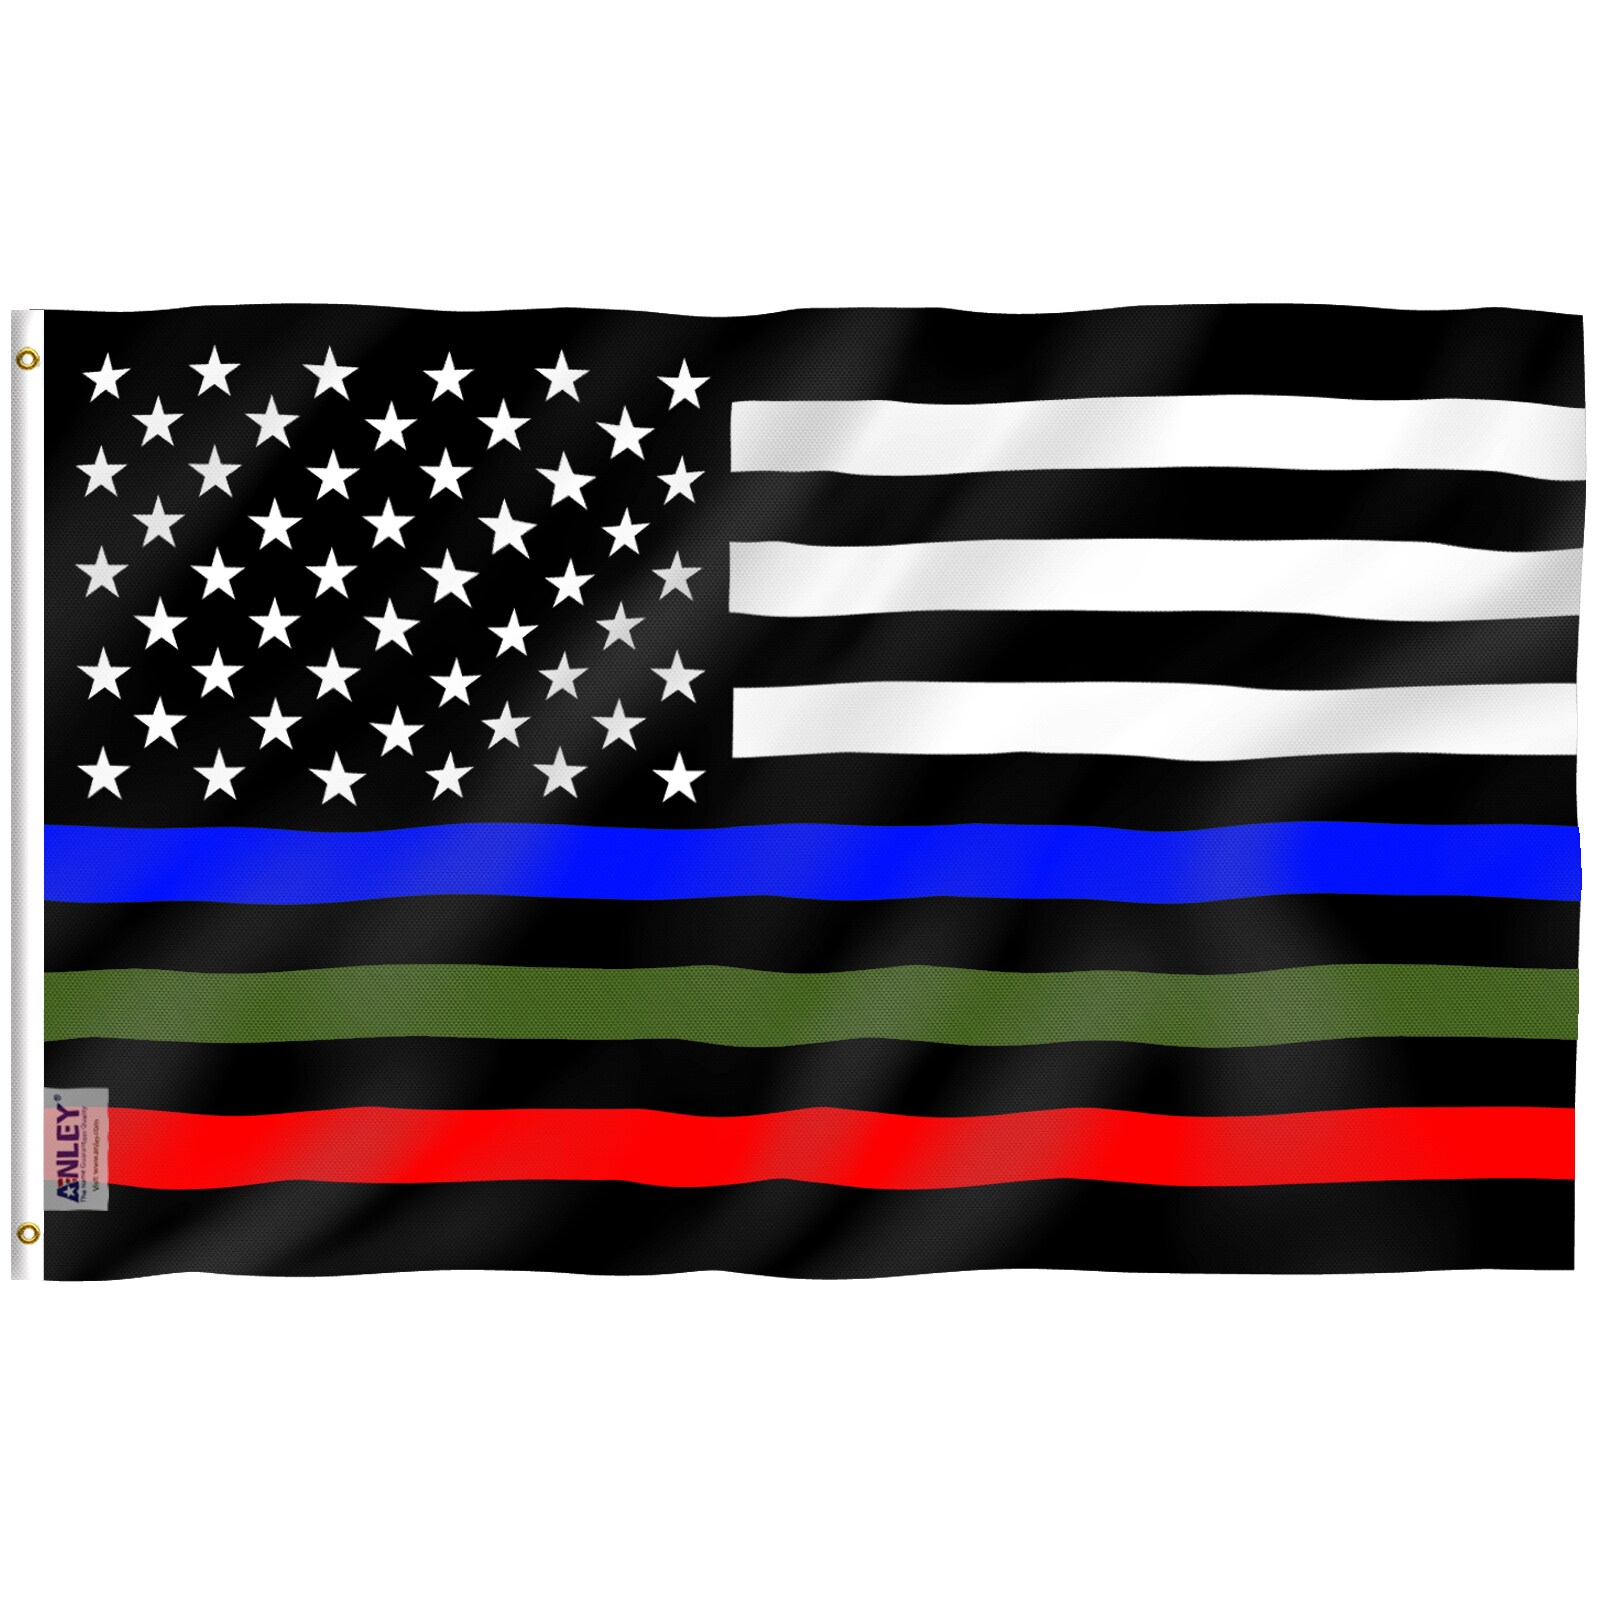 Quality Thin Blue Line American Police Flag 3X5' FADE Resistant Stars & Stripes 